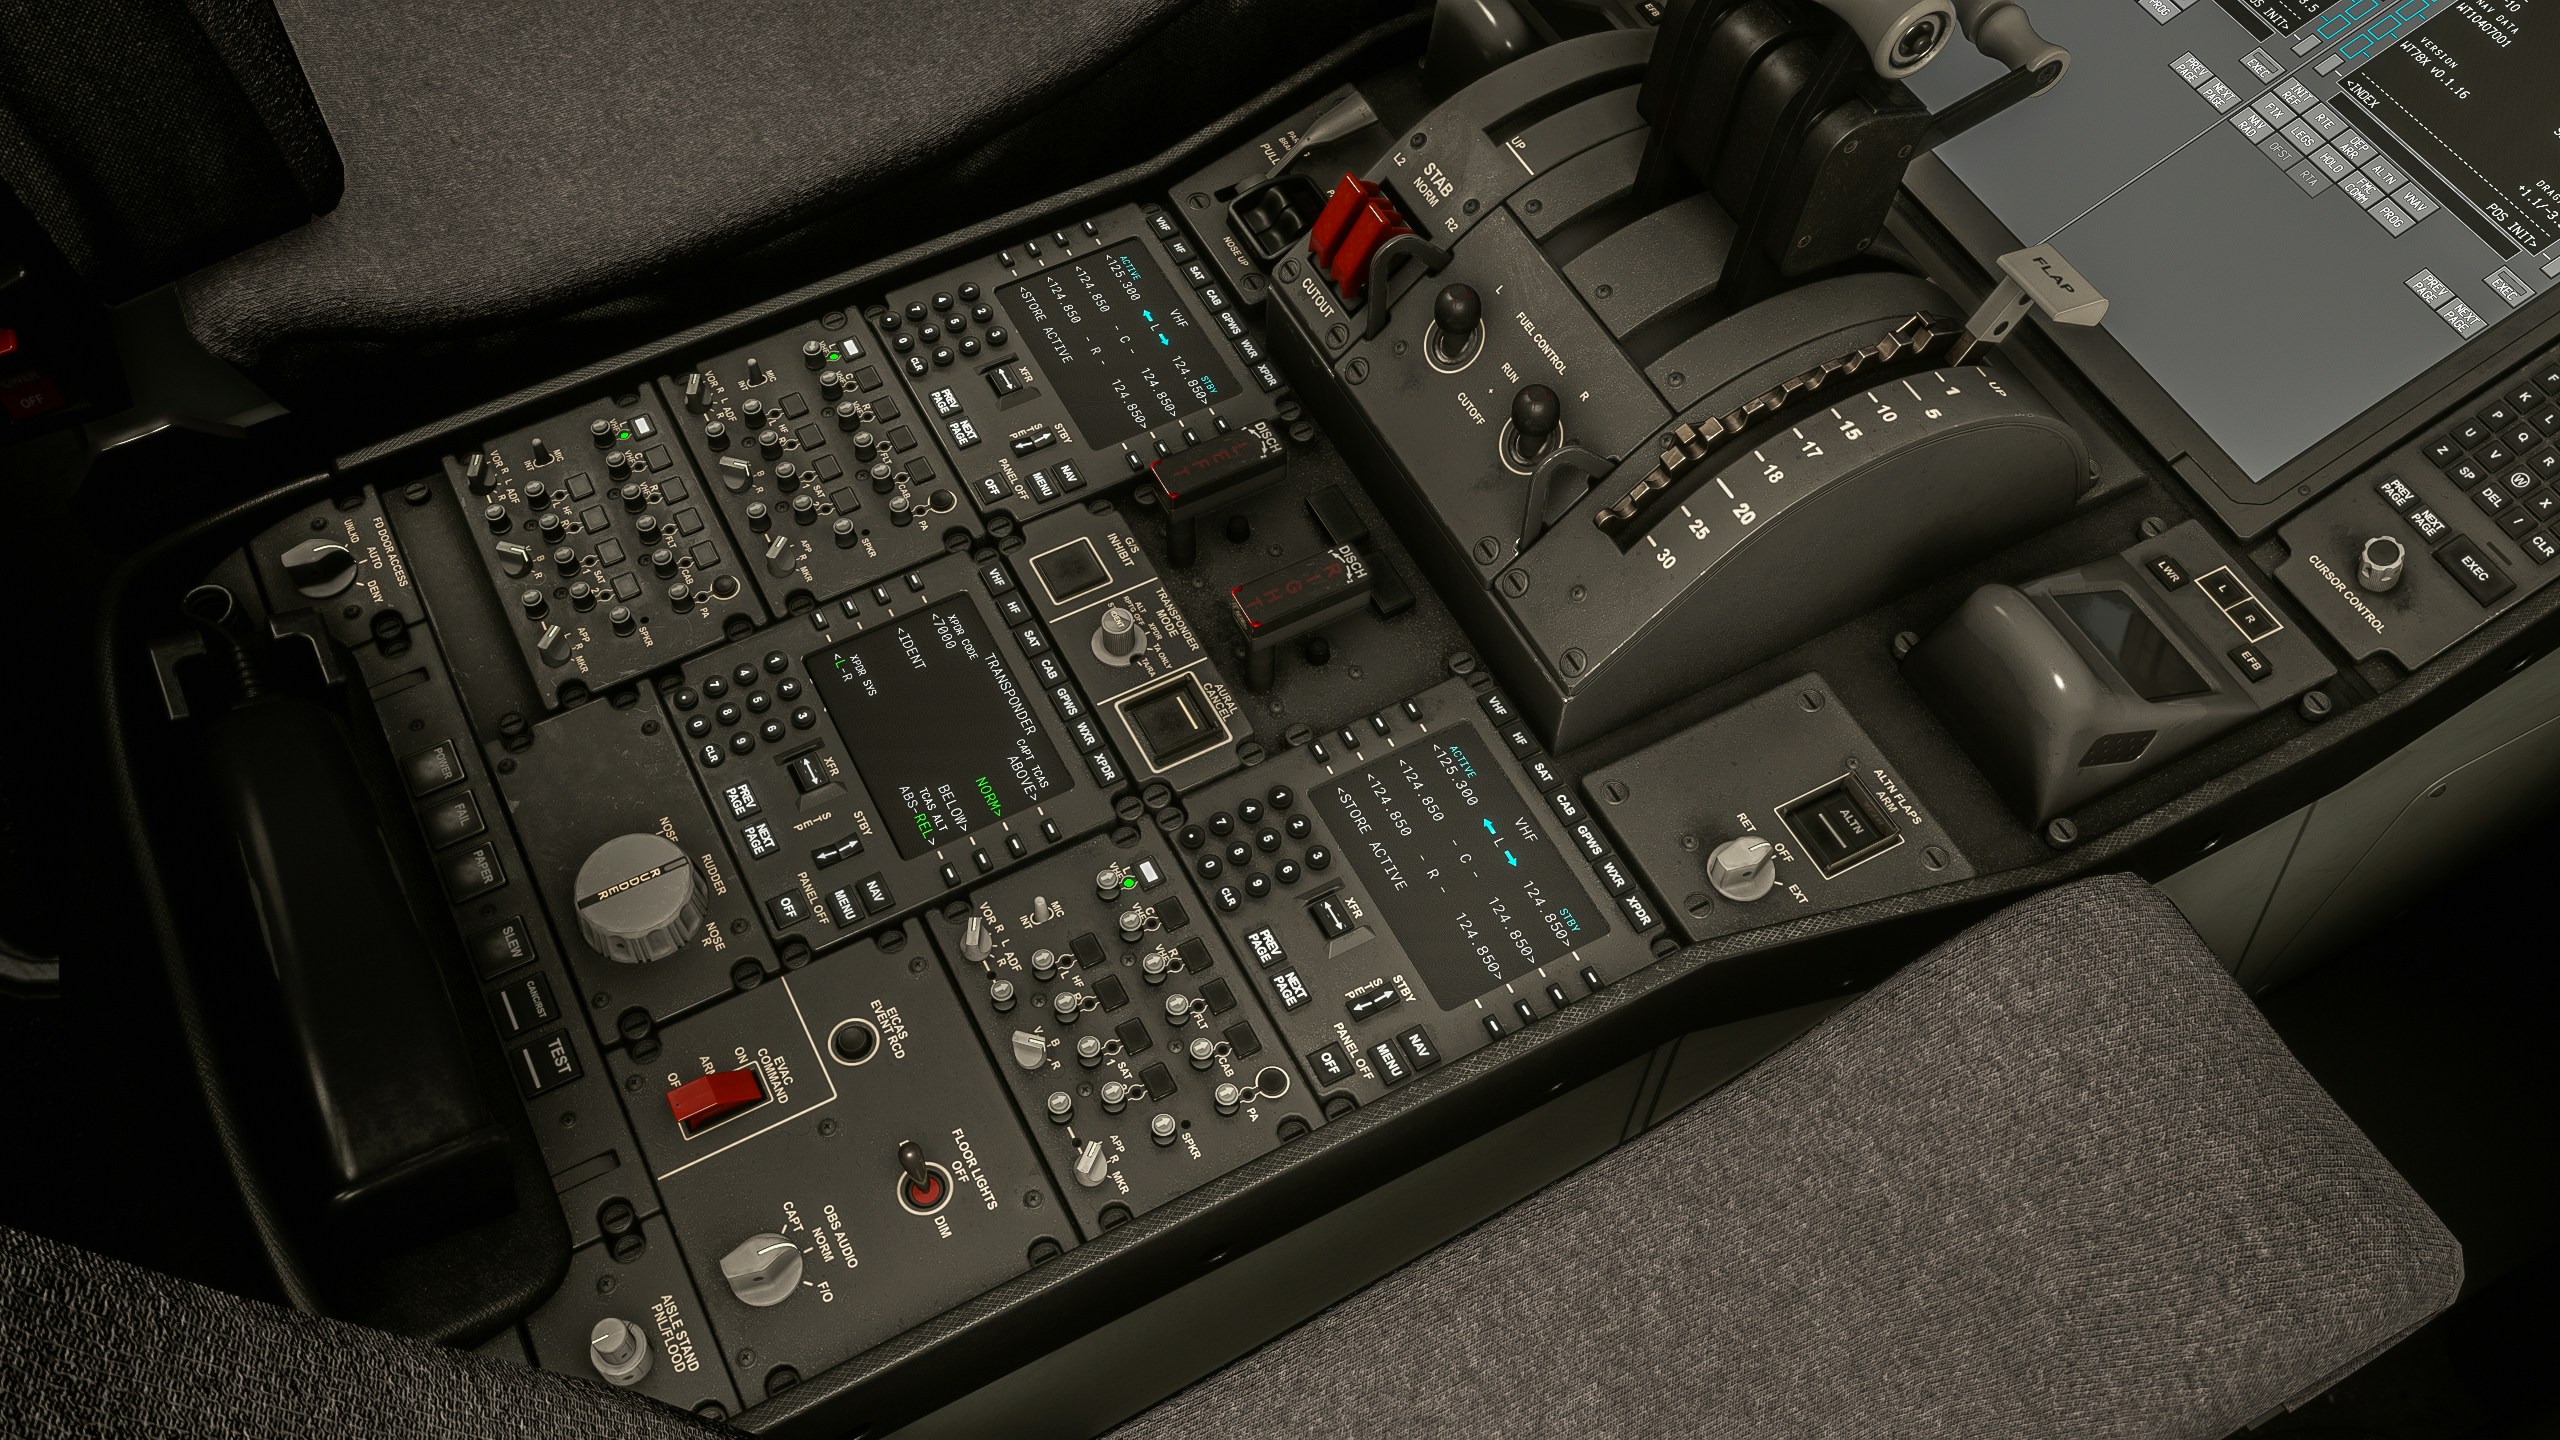 POLYSTORM3D Releases 787 Realistic Cockpit Texture Pack for MSFS